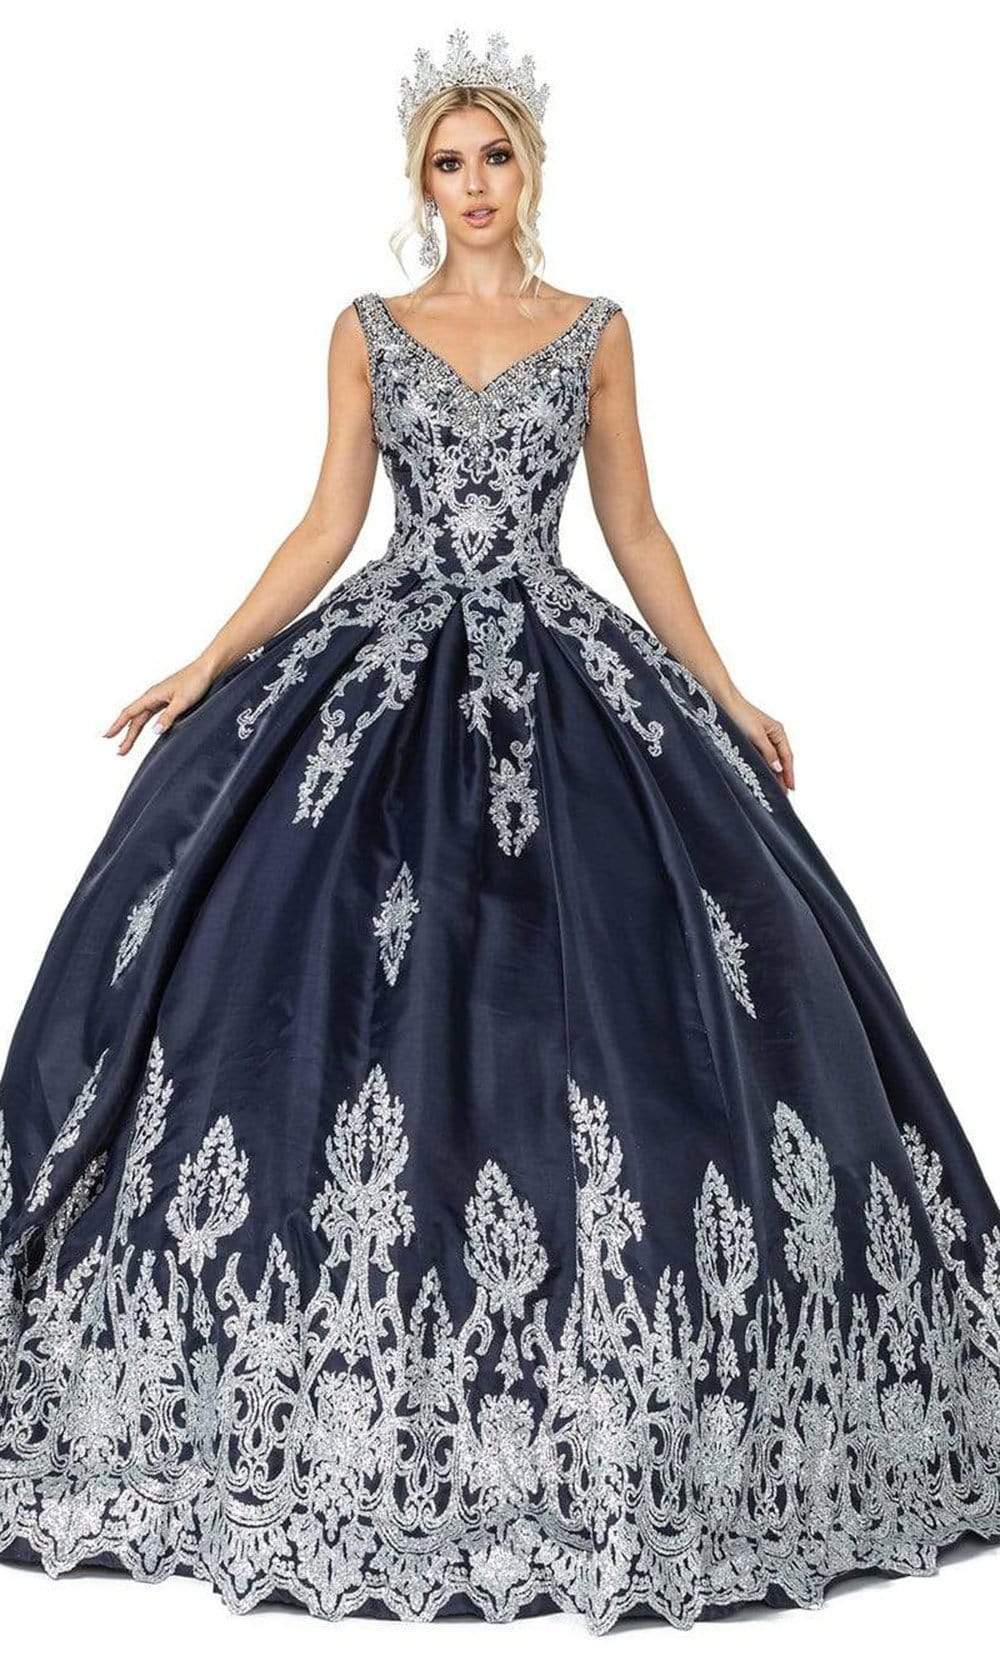 Dancing Queen - 1551 Beaded Lace Applique Embellished Ballgown
